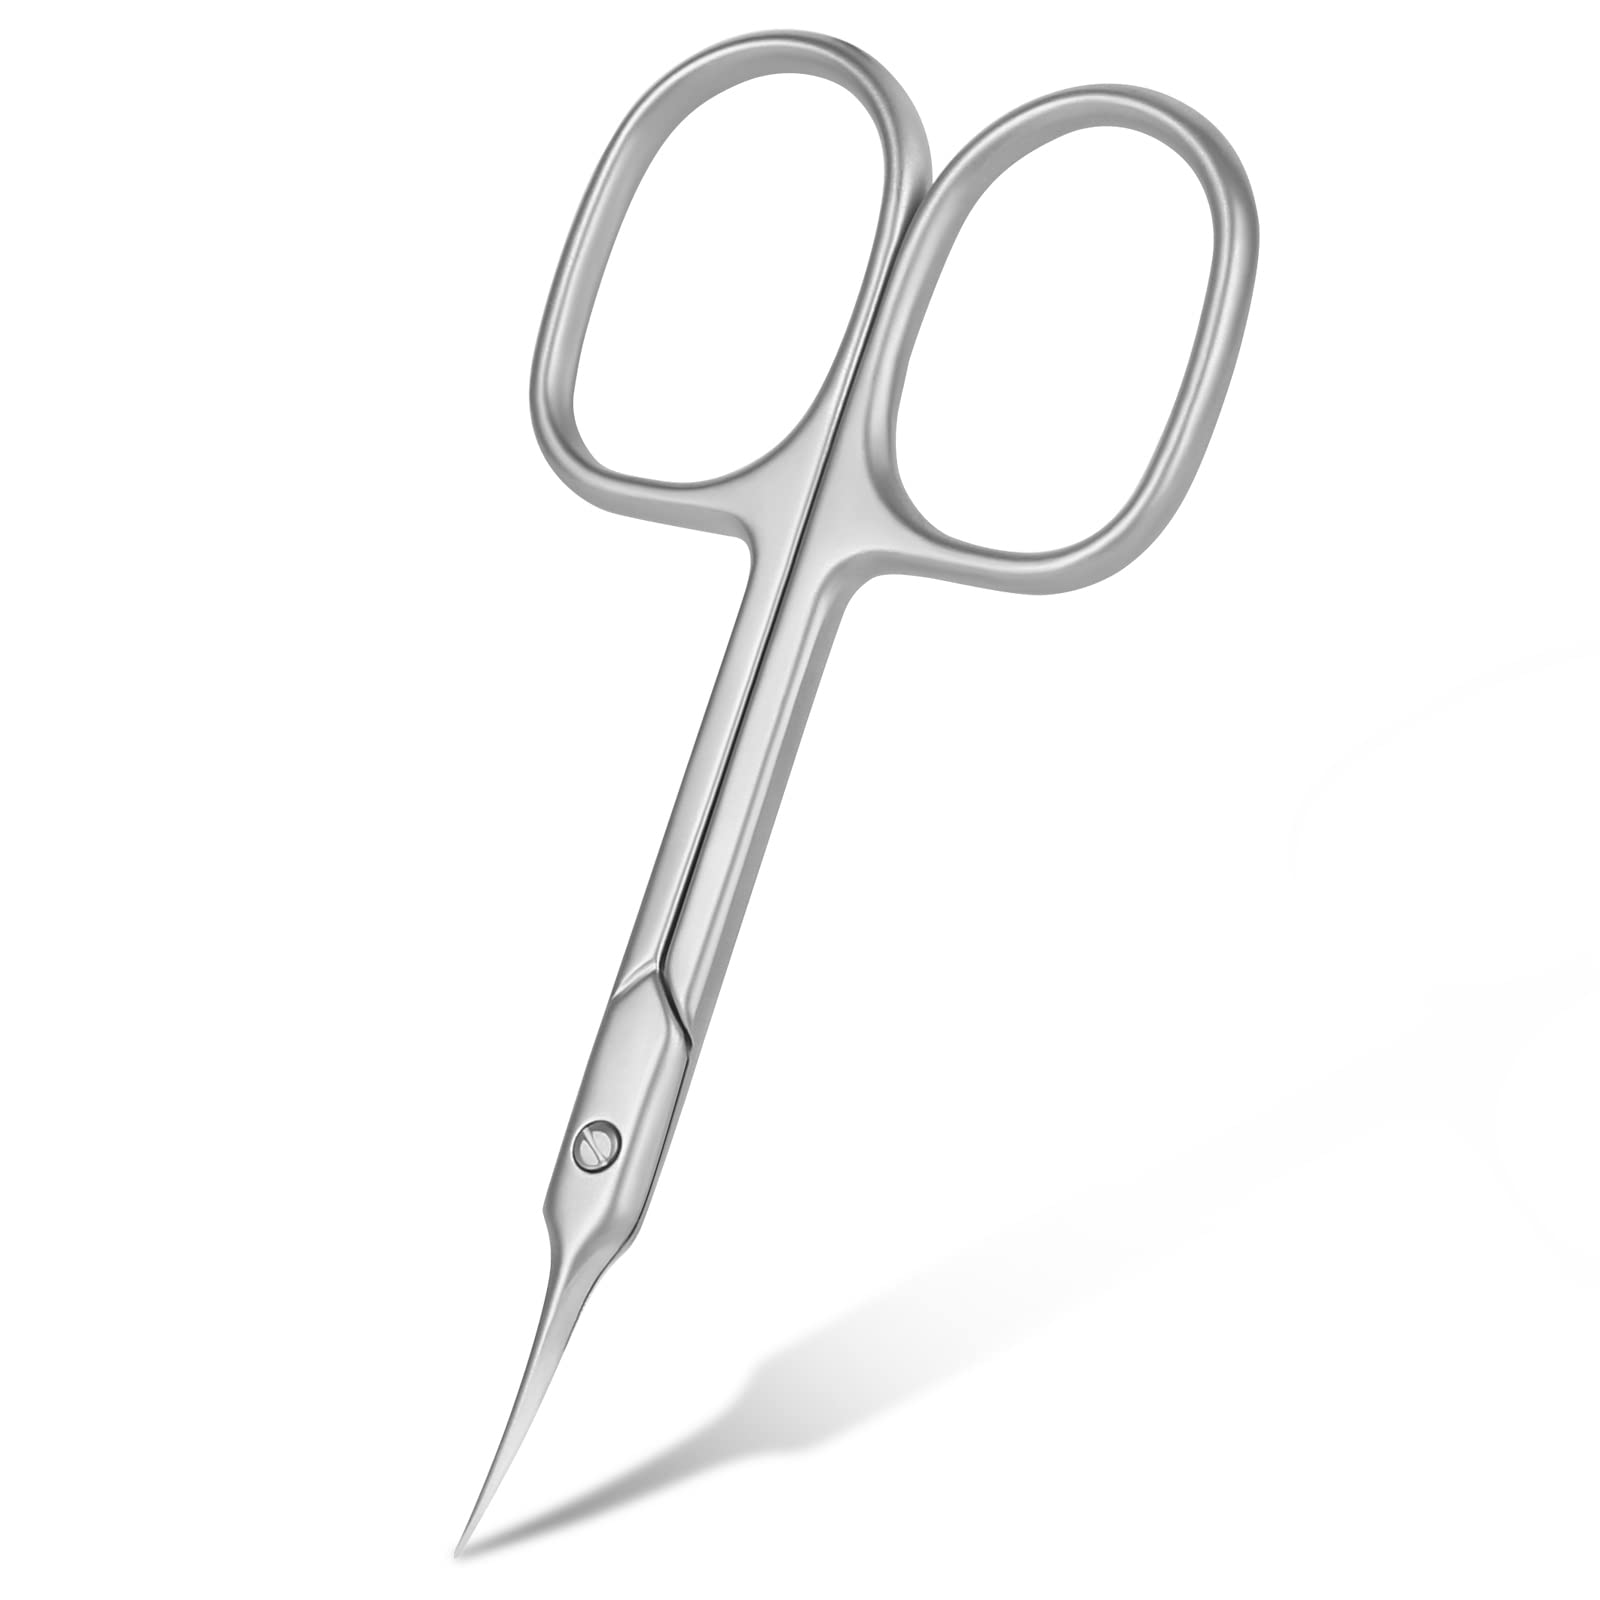 URAQT Nail Scissors, Professional Stainless Steel Curved Cuticle Scissors, Sharp Dead Skin Scissors Manicure Scissors, Pointed Beauty Scissors for Trimming Eyebrows, Nose Hair, Finger & Toe Nail Care